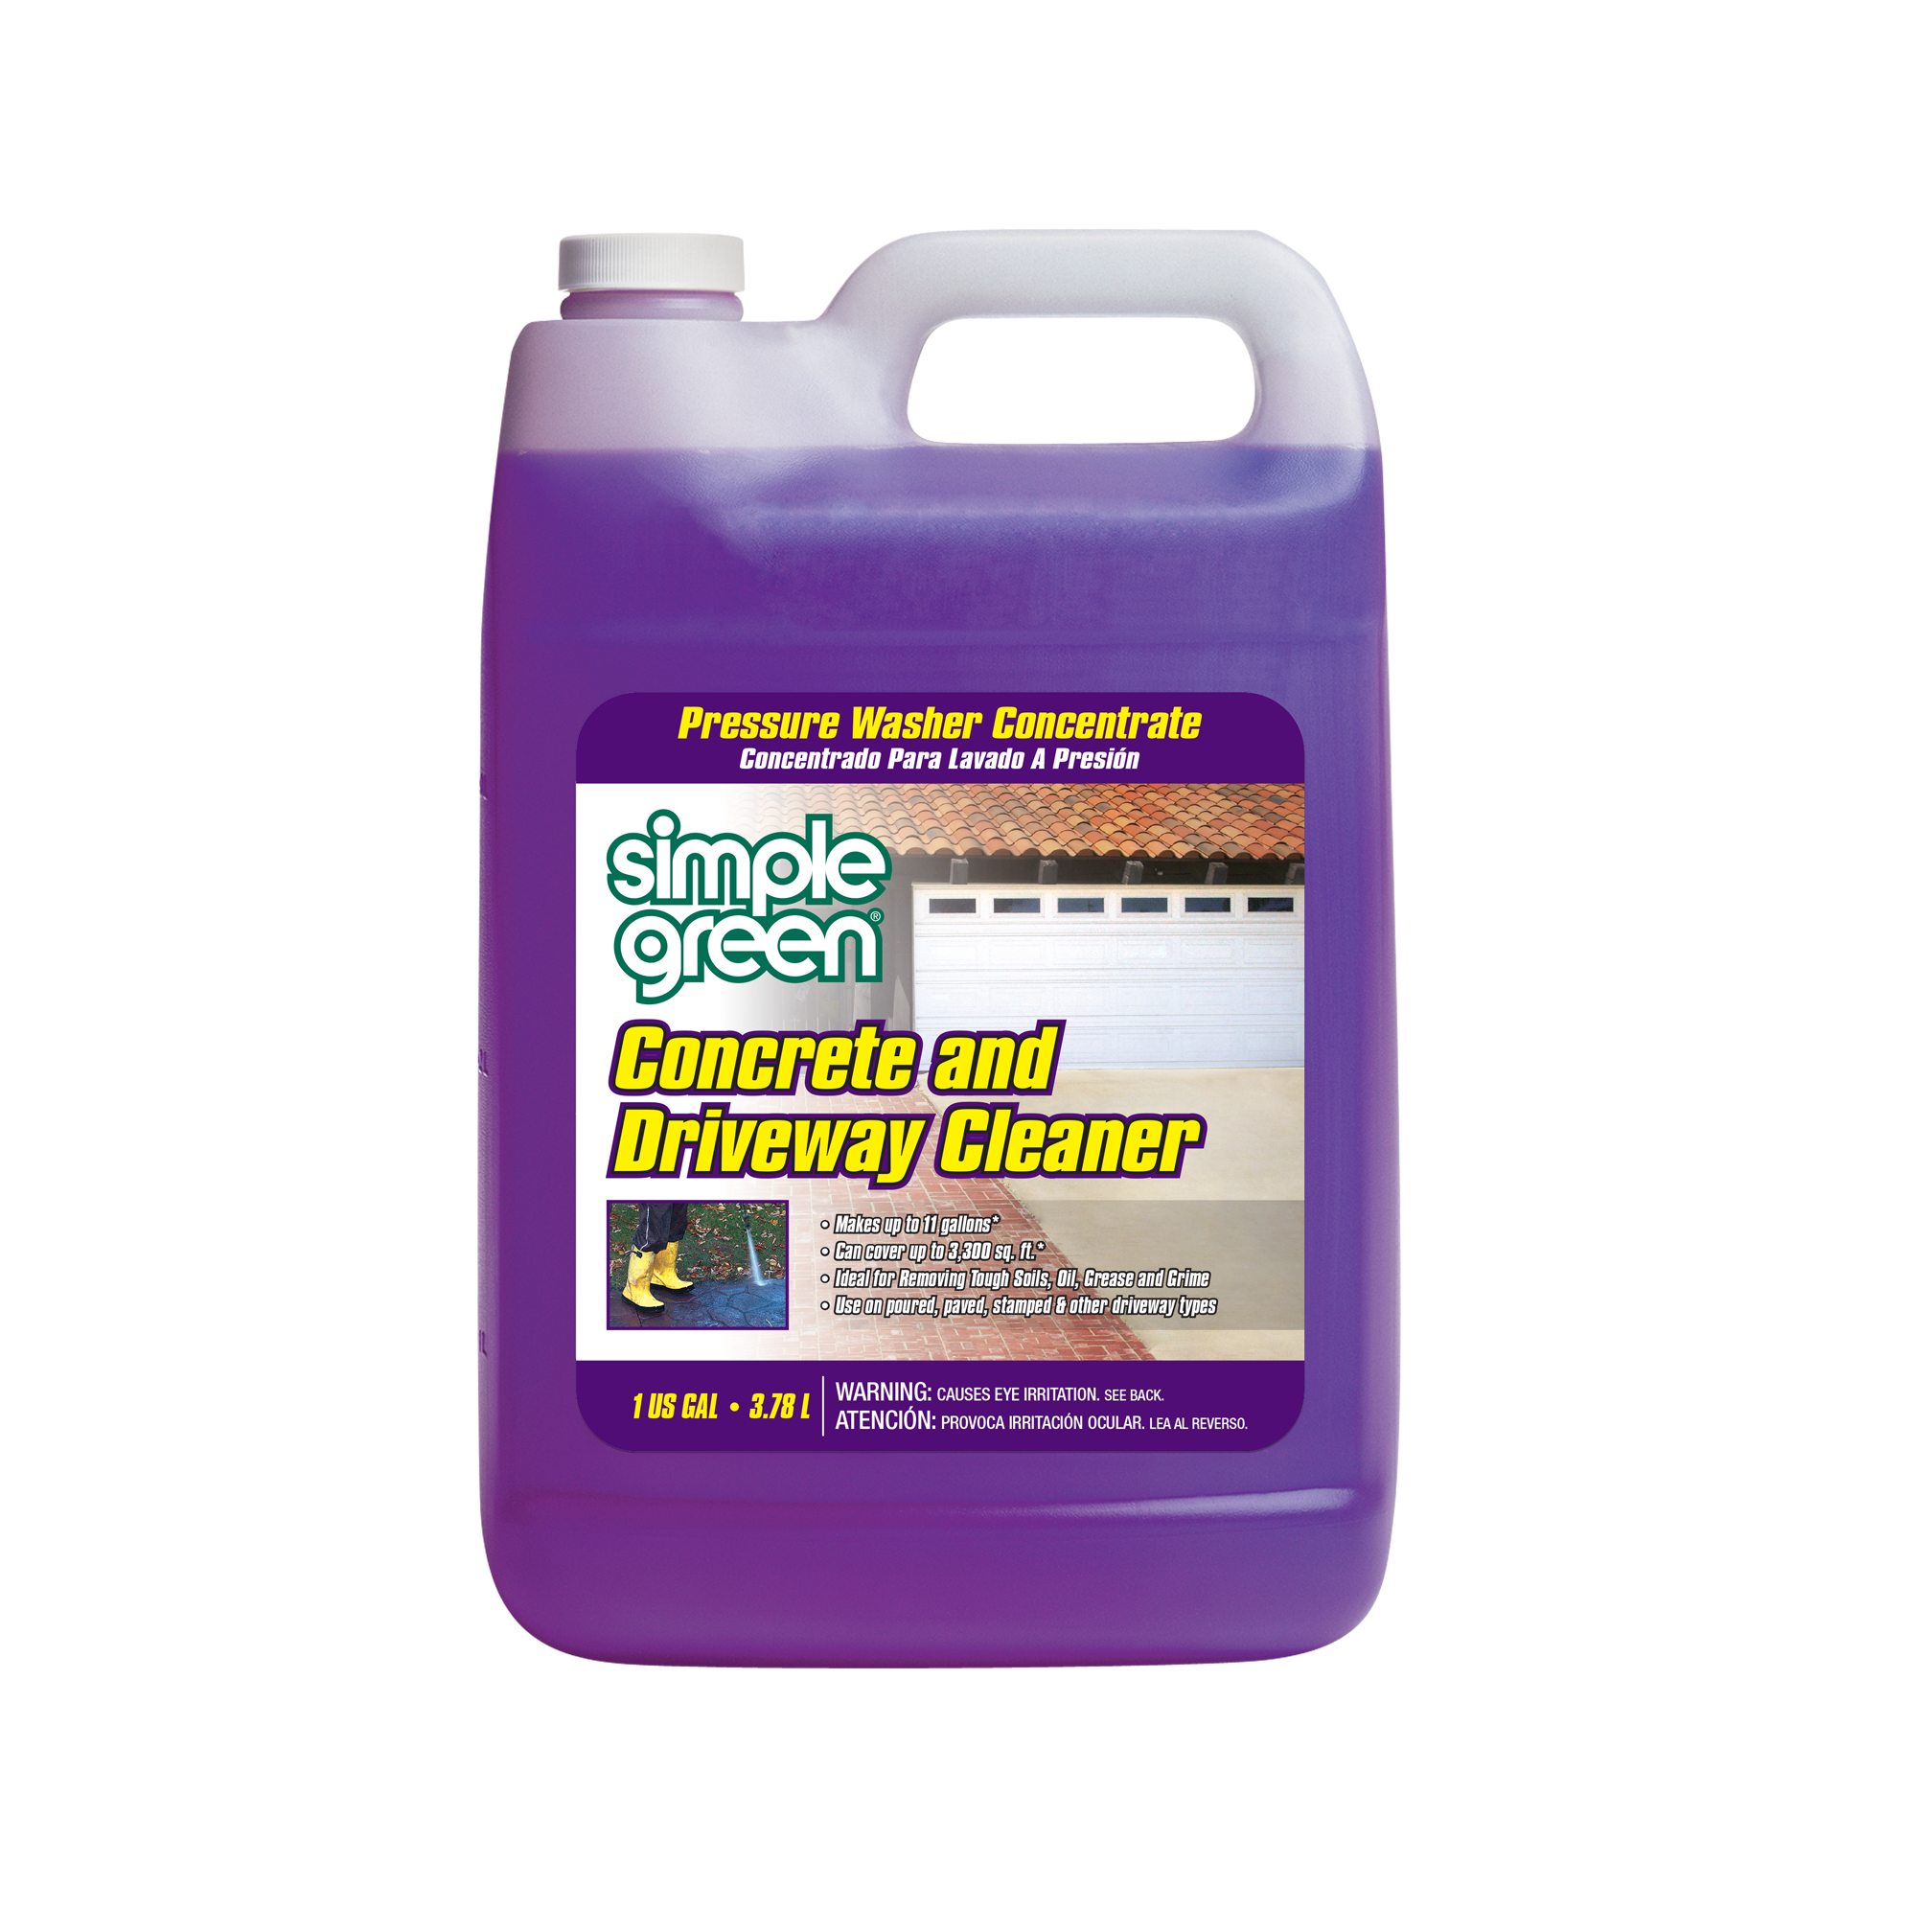 Simple Green® Concrete & Driveway Cleaner - Pressure Washer Concentrate